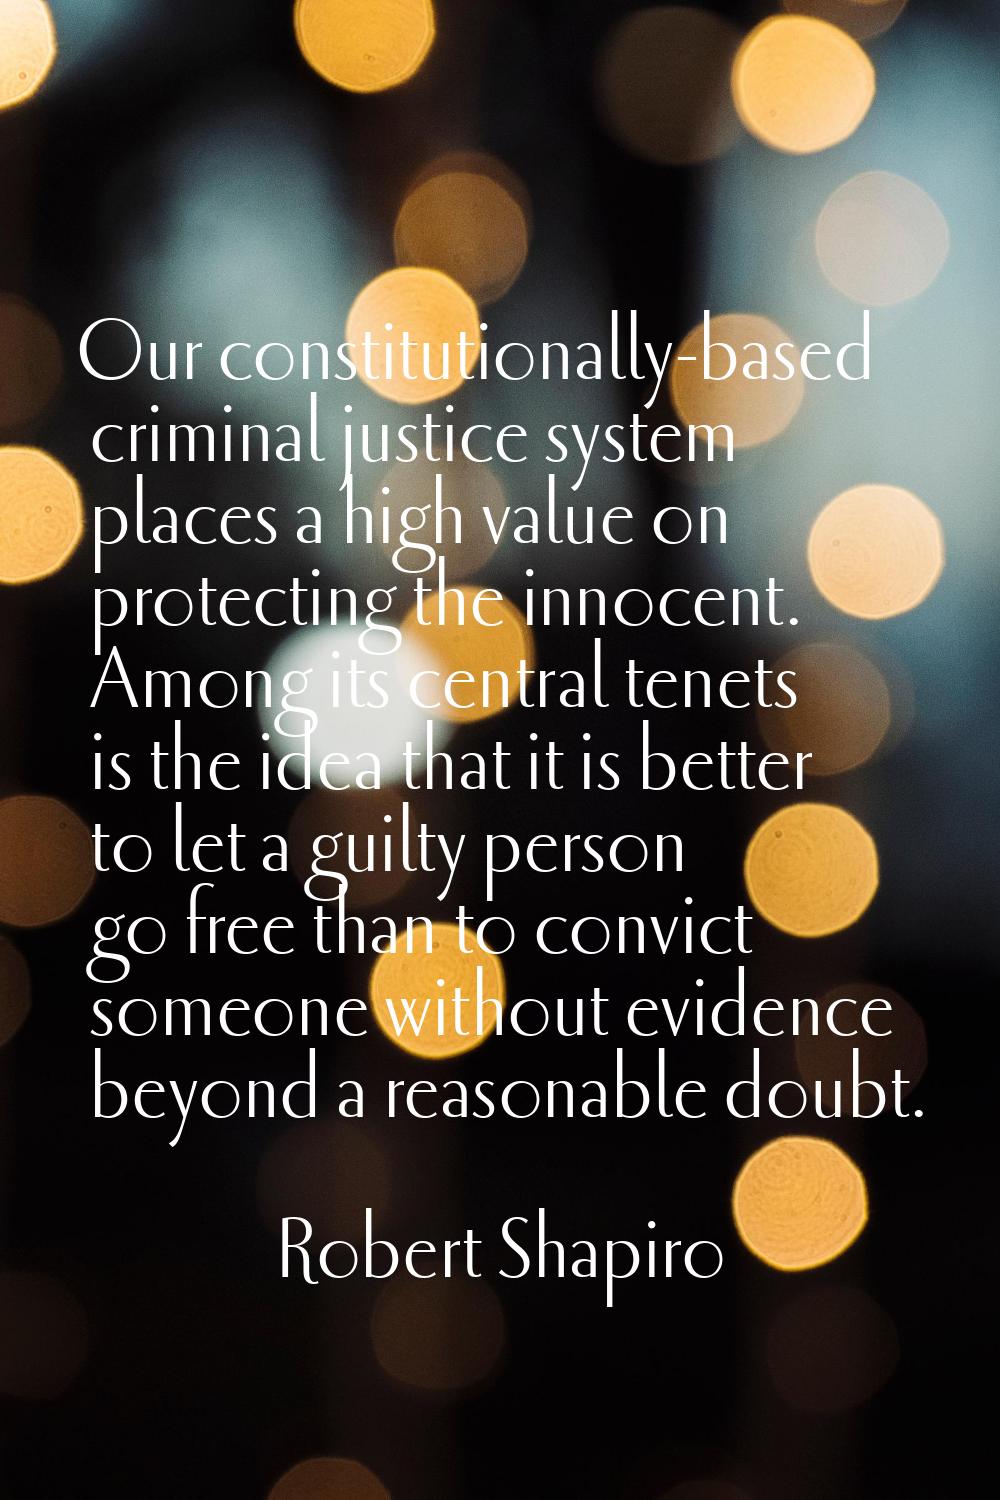 Our constitutionally-based criminal justice system places a high value on protecting the innocent. 